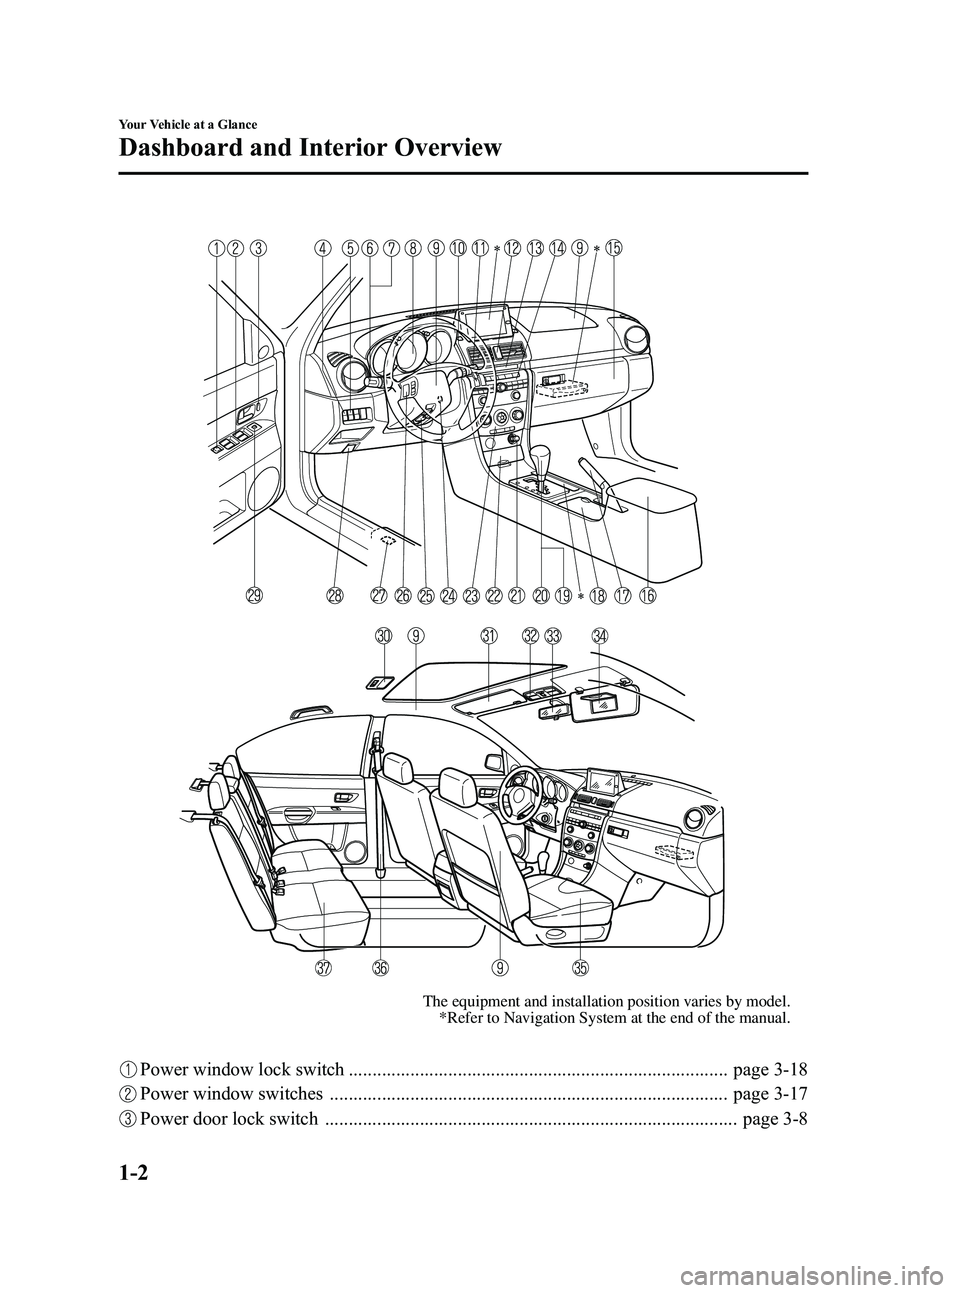 MAZDA MODEL 5 2006  Owners Manual Black plate (8,1)
The equipment and installation position varies by model.*Refer to Navigation System at the end of the manual.
Power window lock switch ...............................................